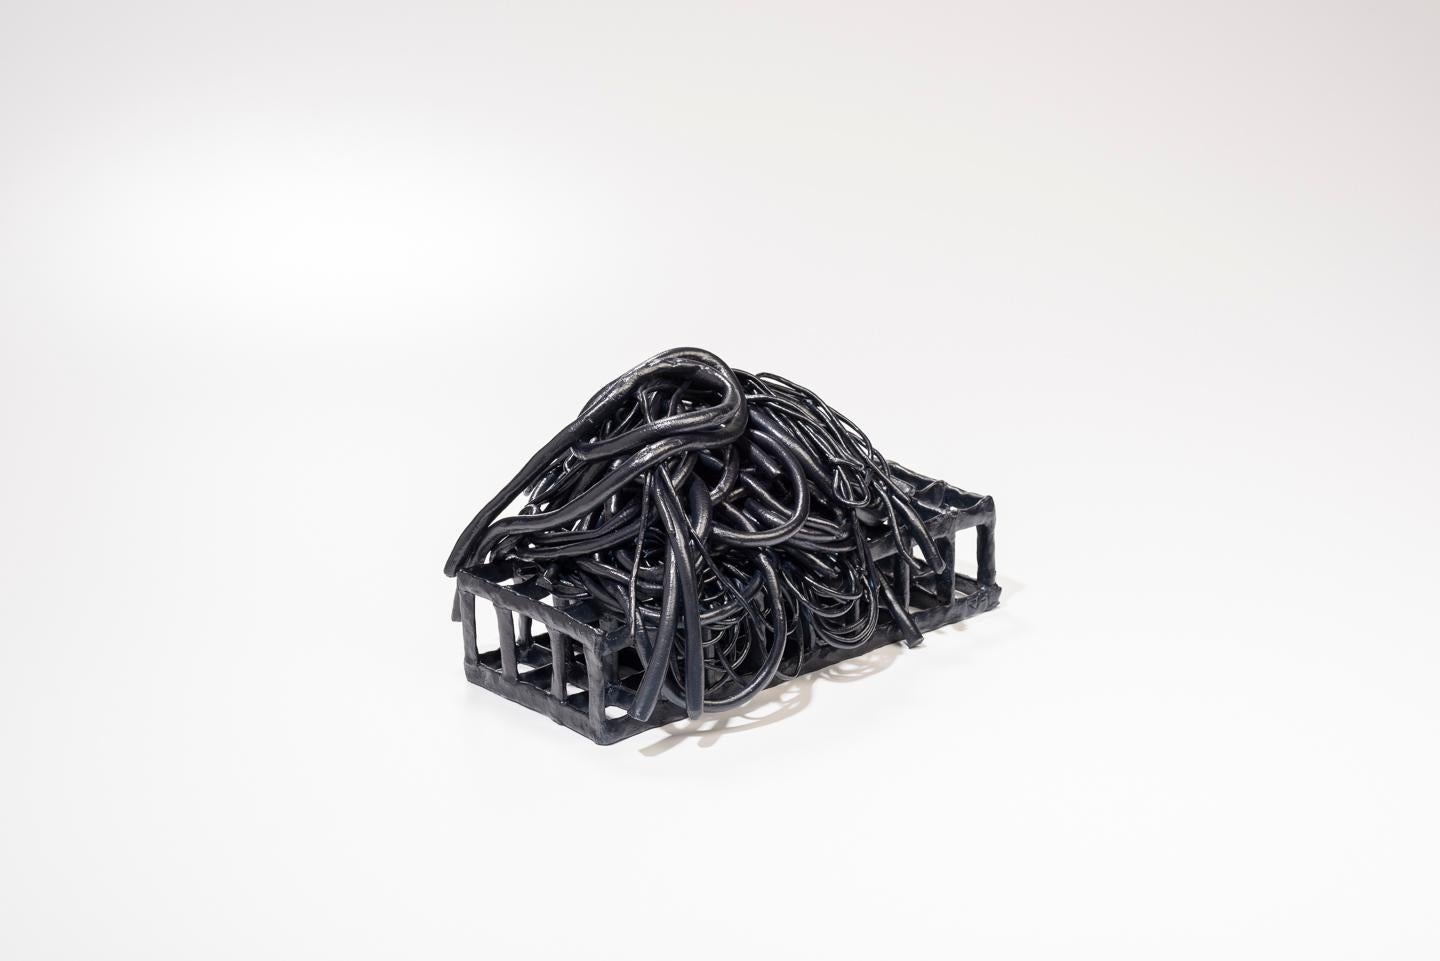 Organic Modern Joanna Poag Binding Time (Black Grid with Coils) Ceramic Sculpture, 2019 For Sale